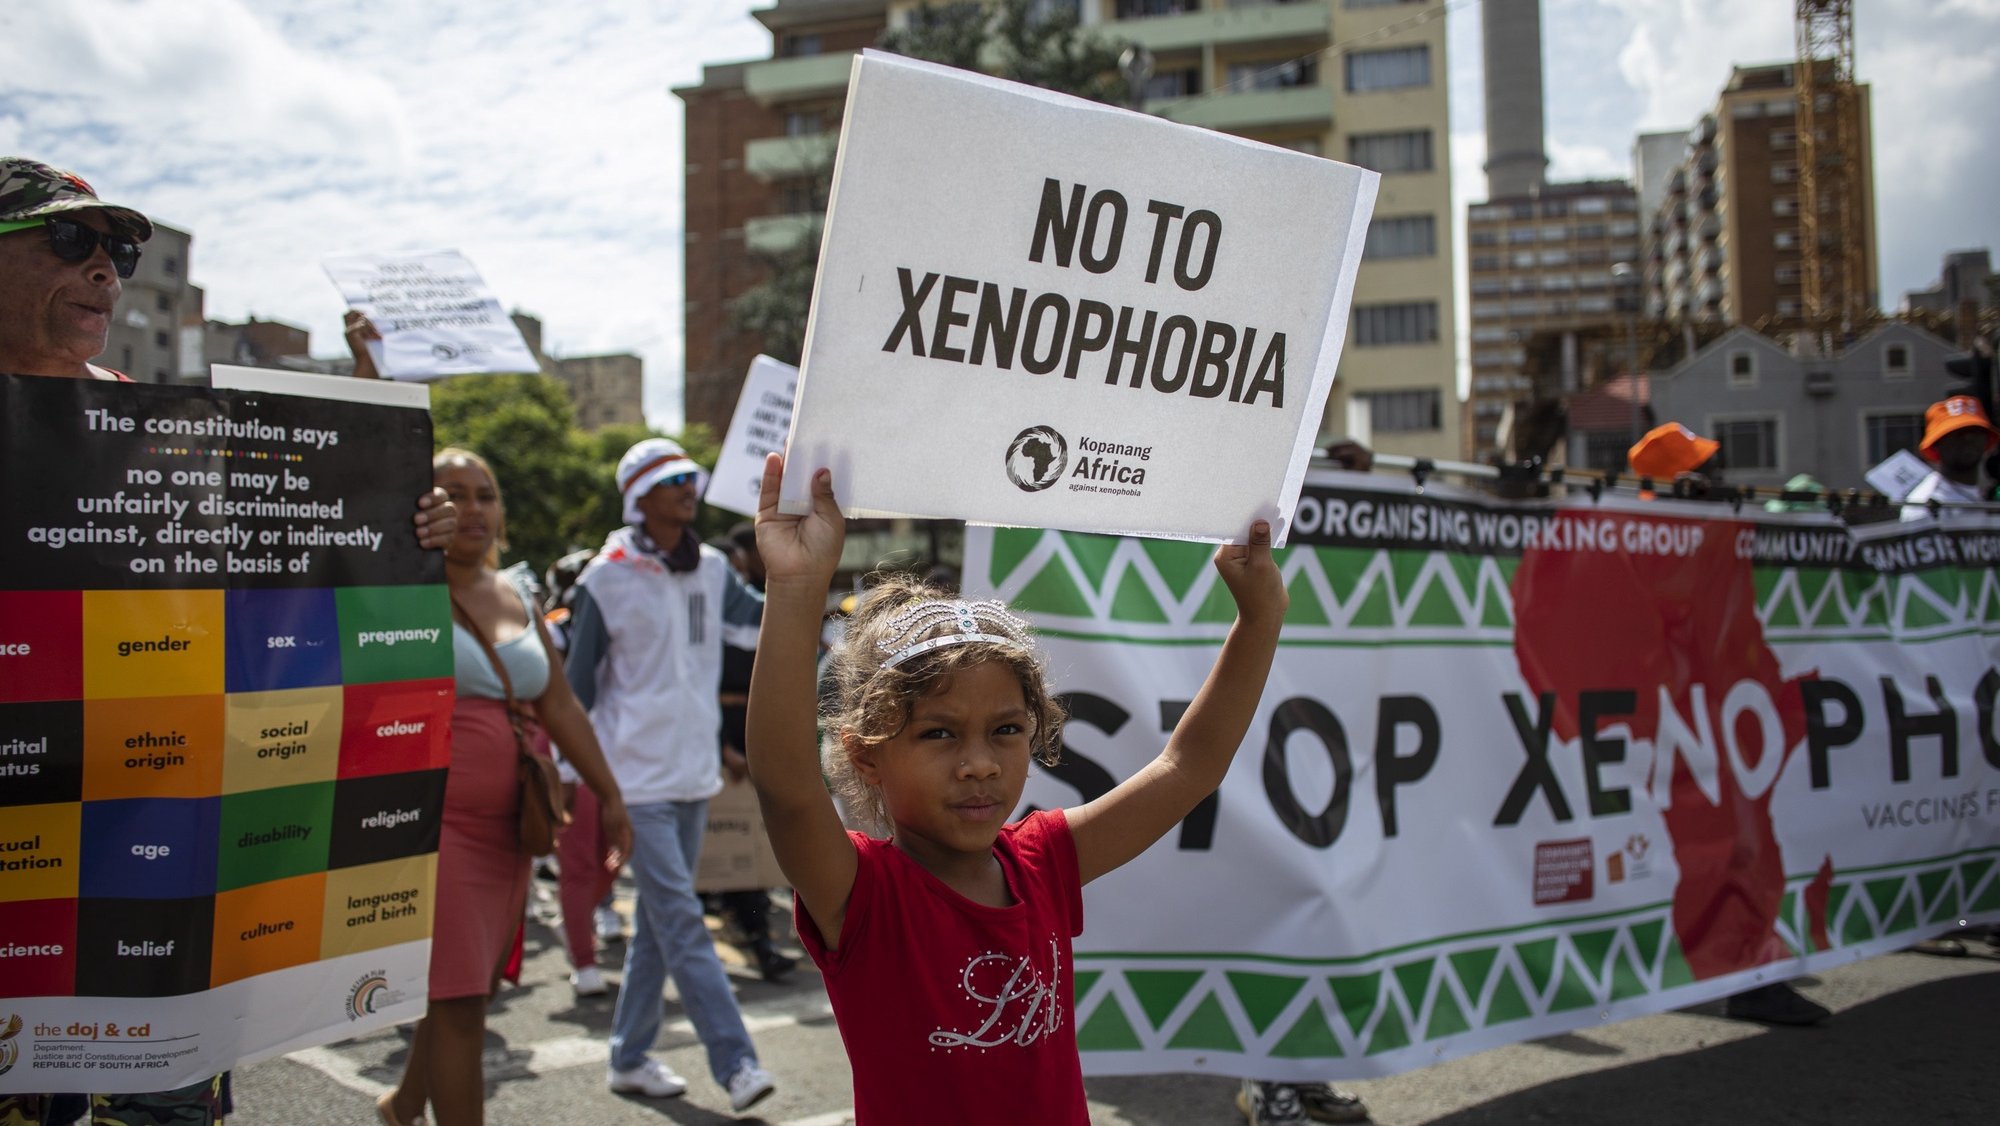 epa09850519 People take to the streets during a rally organized by the Kopanang Africa against Xenophobia organization, calling for an end to &#039;xenophobic sentiments and groups&#039; in Johannesburg, South Africa, 26 March 2022. Protesters mainly denounced the recent formation and increasing popularity of anti foreigner group &#039;Operation Dudula&#039; which actively calls for the removal of foreign residents.  EPA/Kim Ludbrook